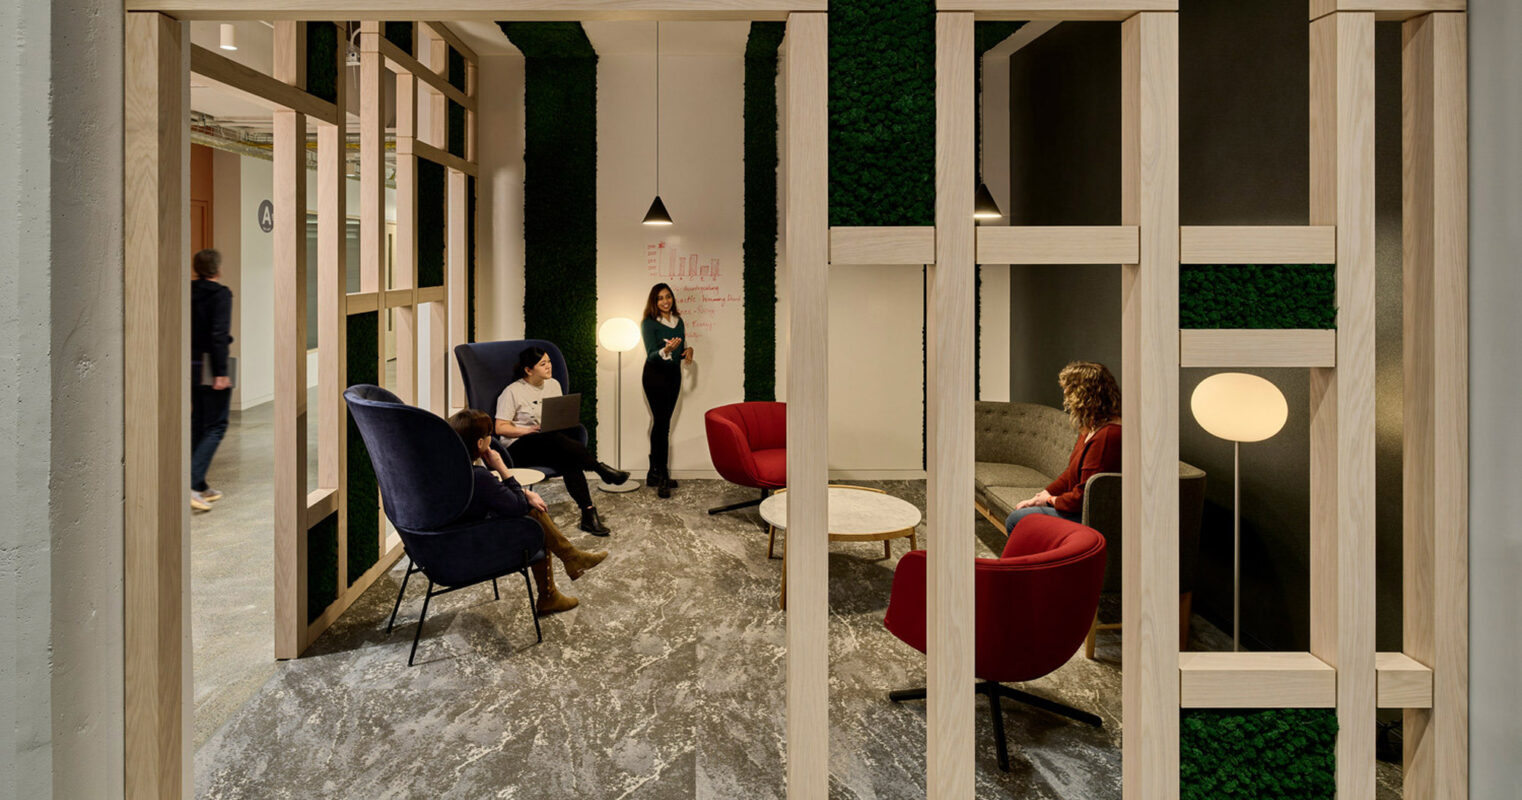 Modern office space with natural wood framing and green wall accents. Two individuals engage in work at tables with contemporary, dark blue armchairs under sleek hanging lights, enhancing the space's inviting ambiance.